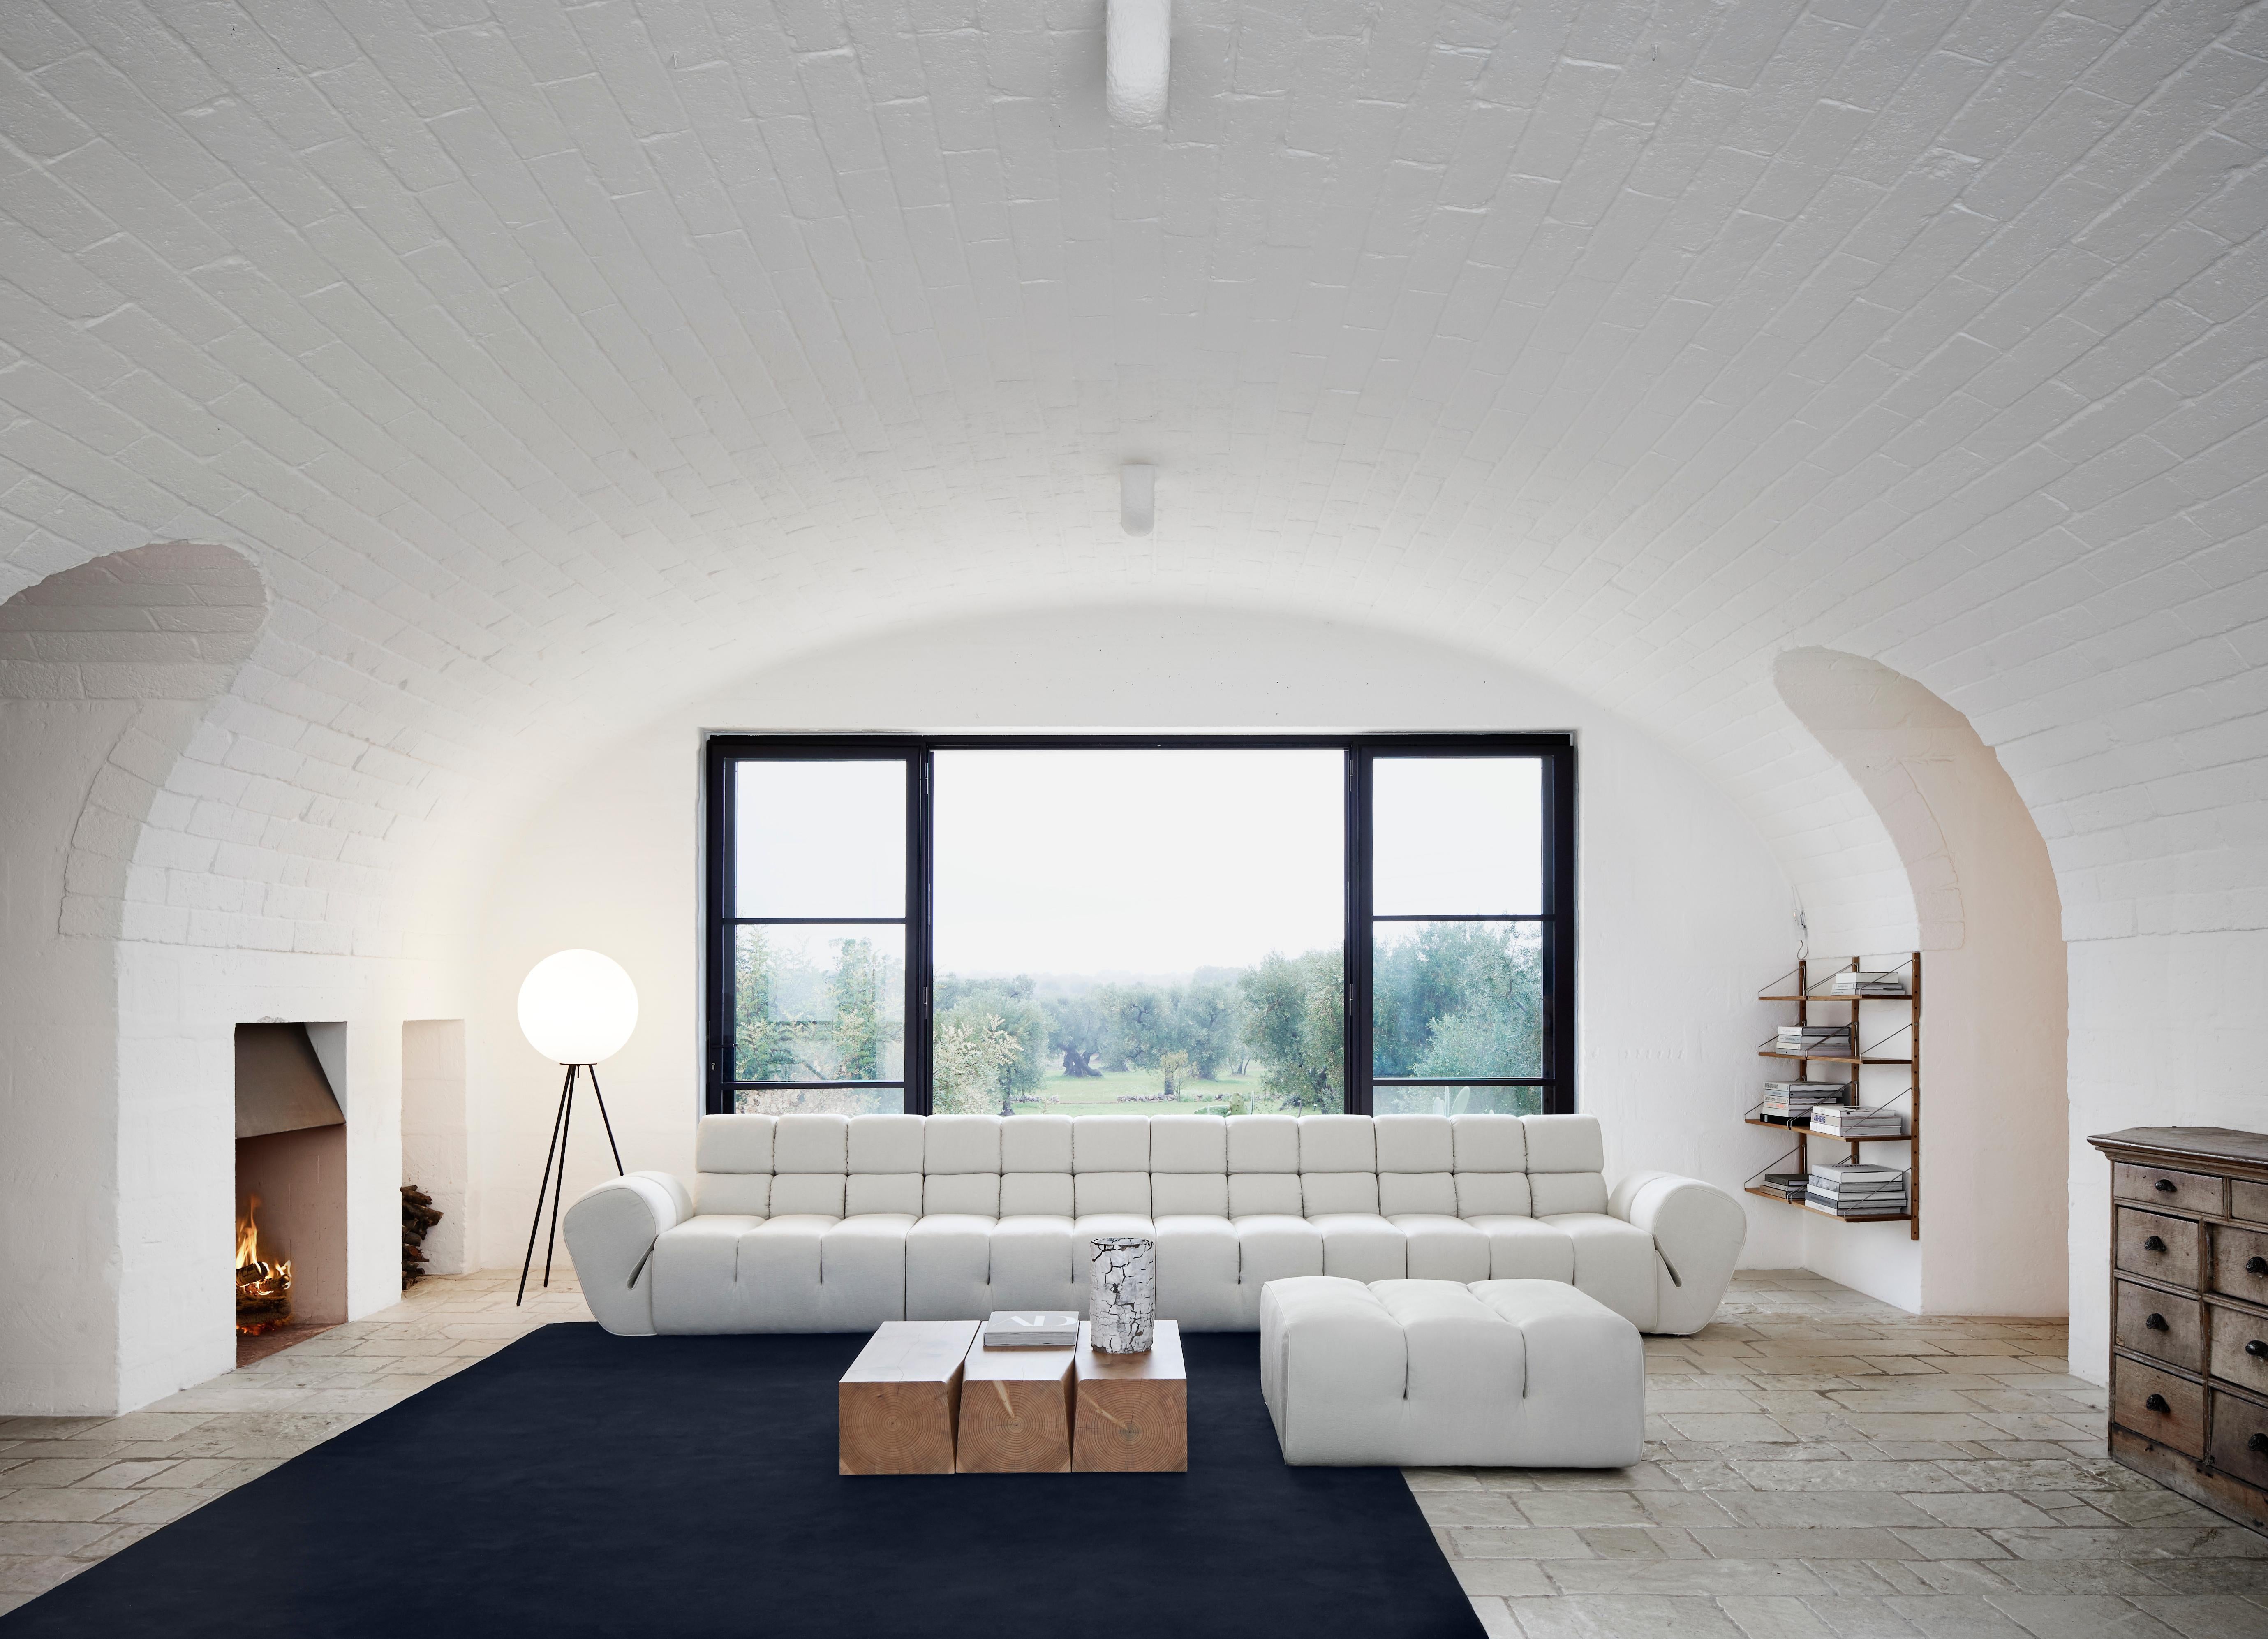 Sectional sofa Palmo by Amura Lab 
Designer: Emanuel Gargano

Model shown: textile - Fibris 03

Inspired by the natural gesture of an opening hand, Palmo is the new living concept designed by Emanuel Gargano.
The leather folds become the